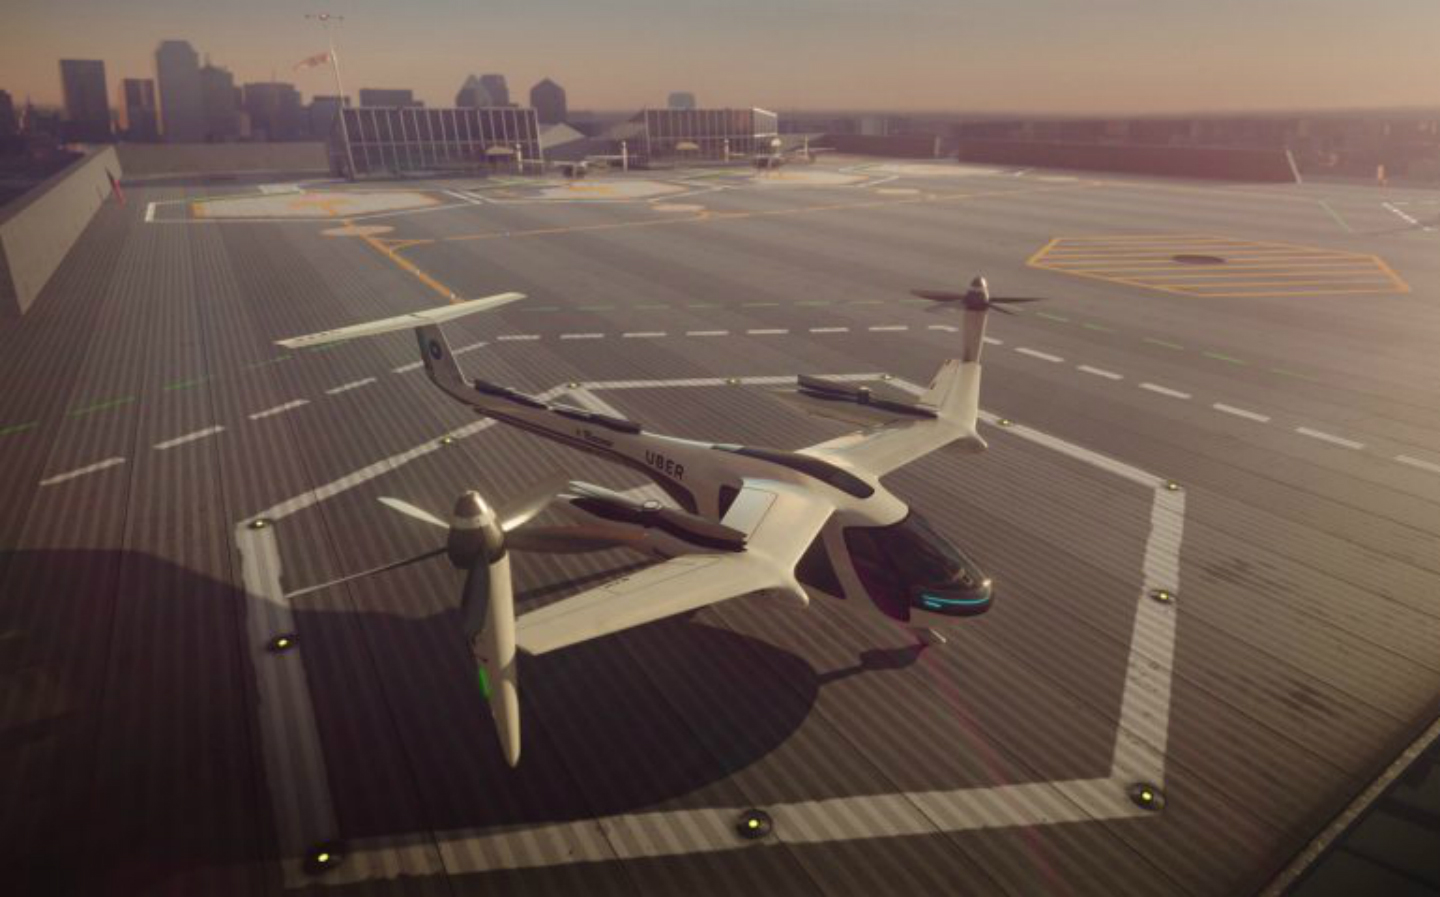 Uber and NASA to launch electric flying taxis 'by 2020'